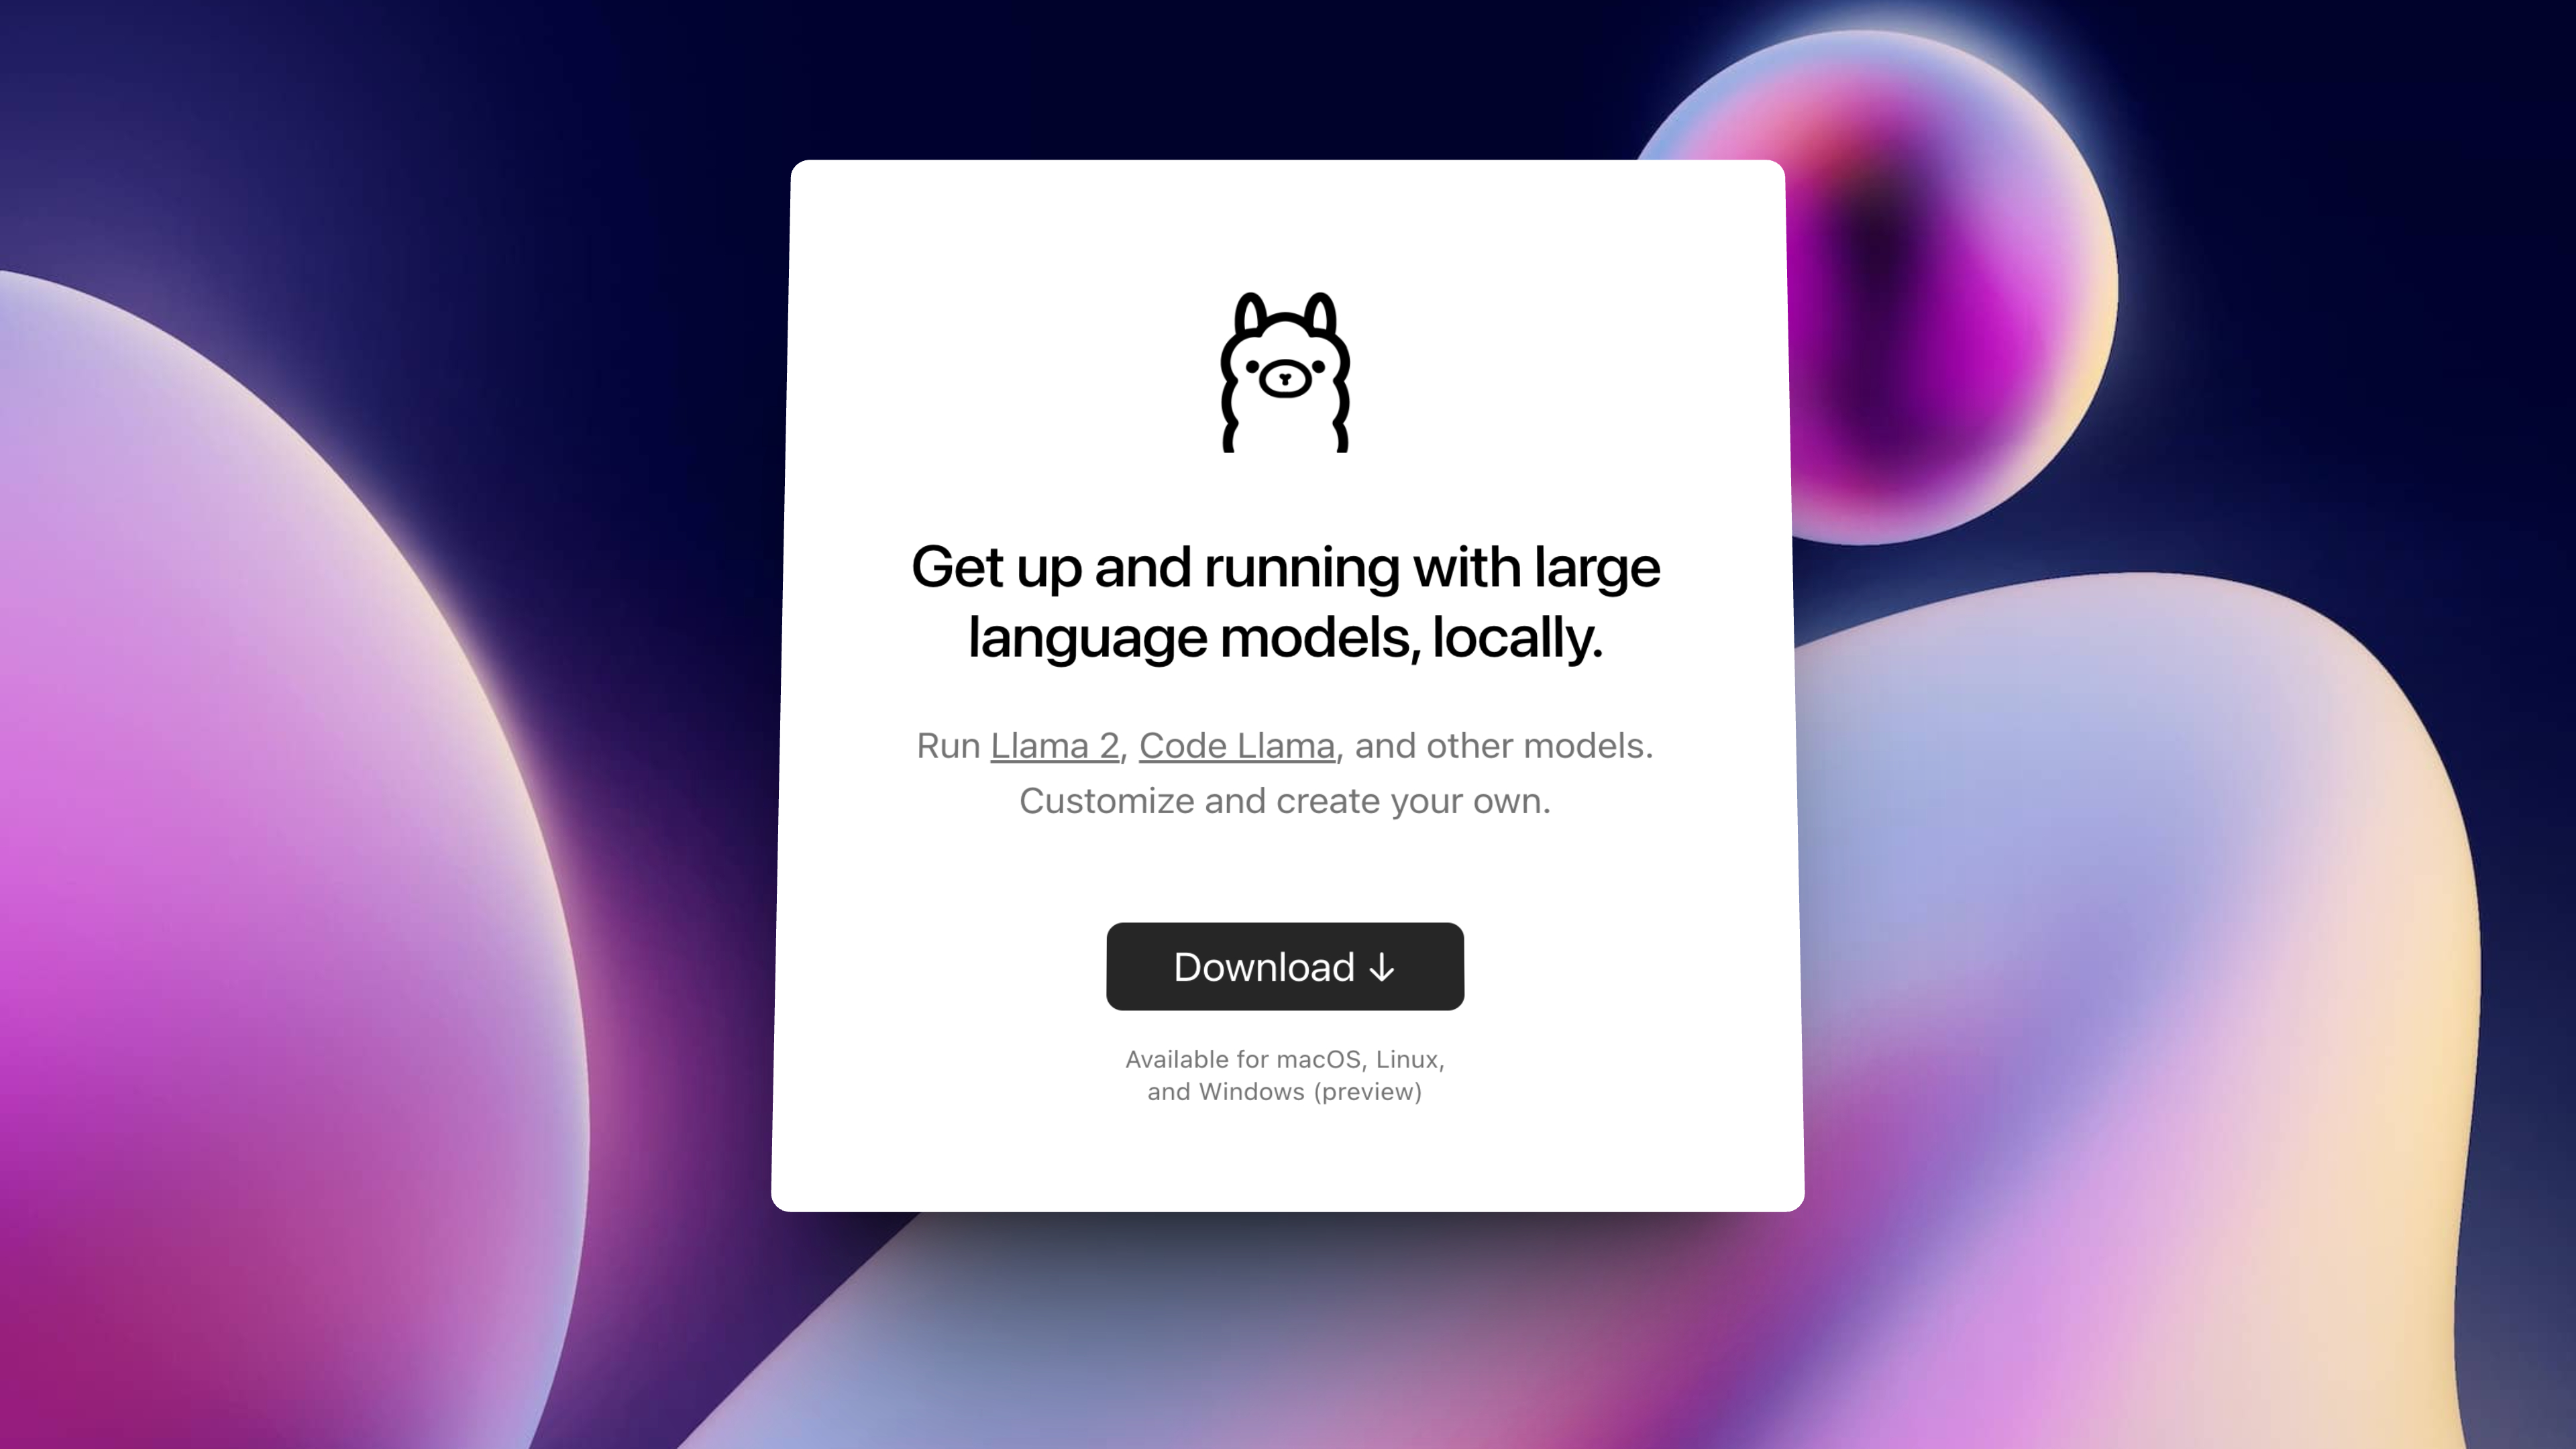 A screenshot of a webpage with a prominent 'Download' button offering to get users started with large language models locally.